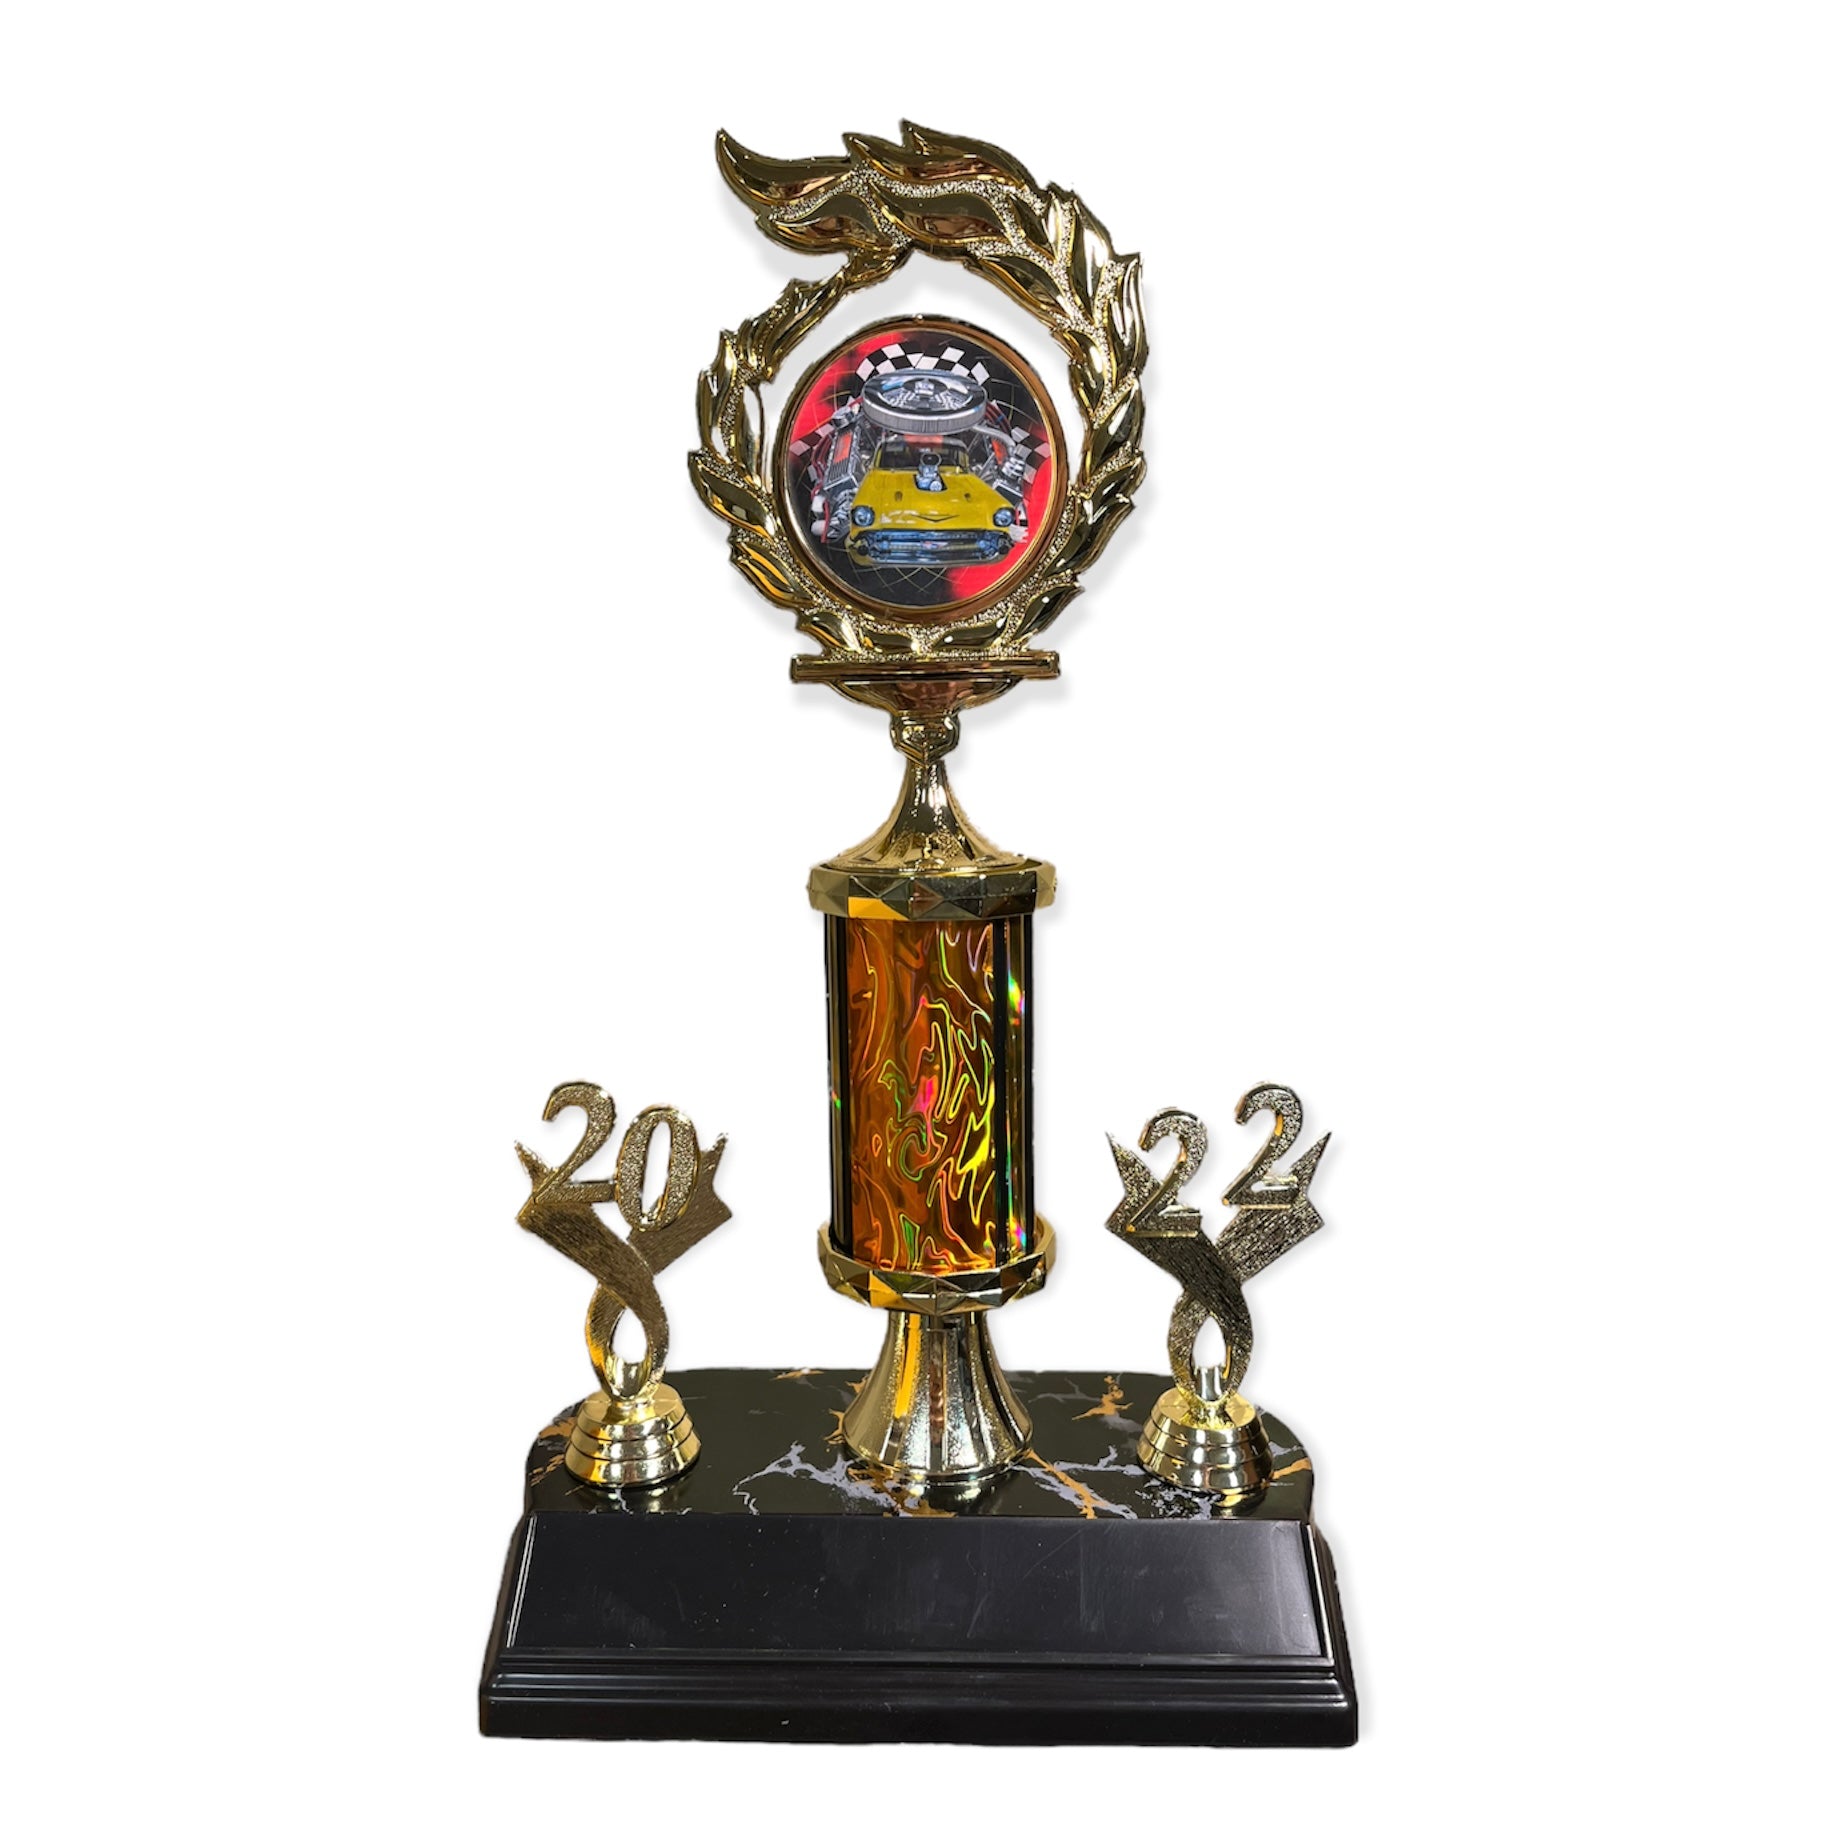 car show trophy with free engraved plate